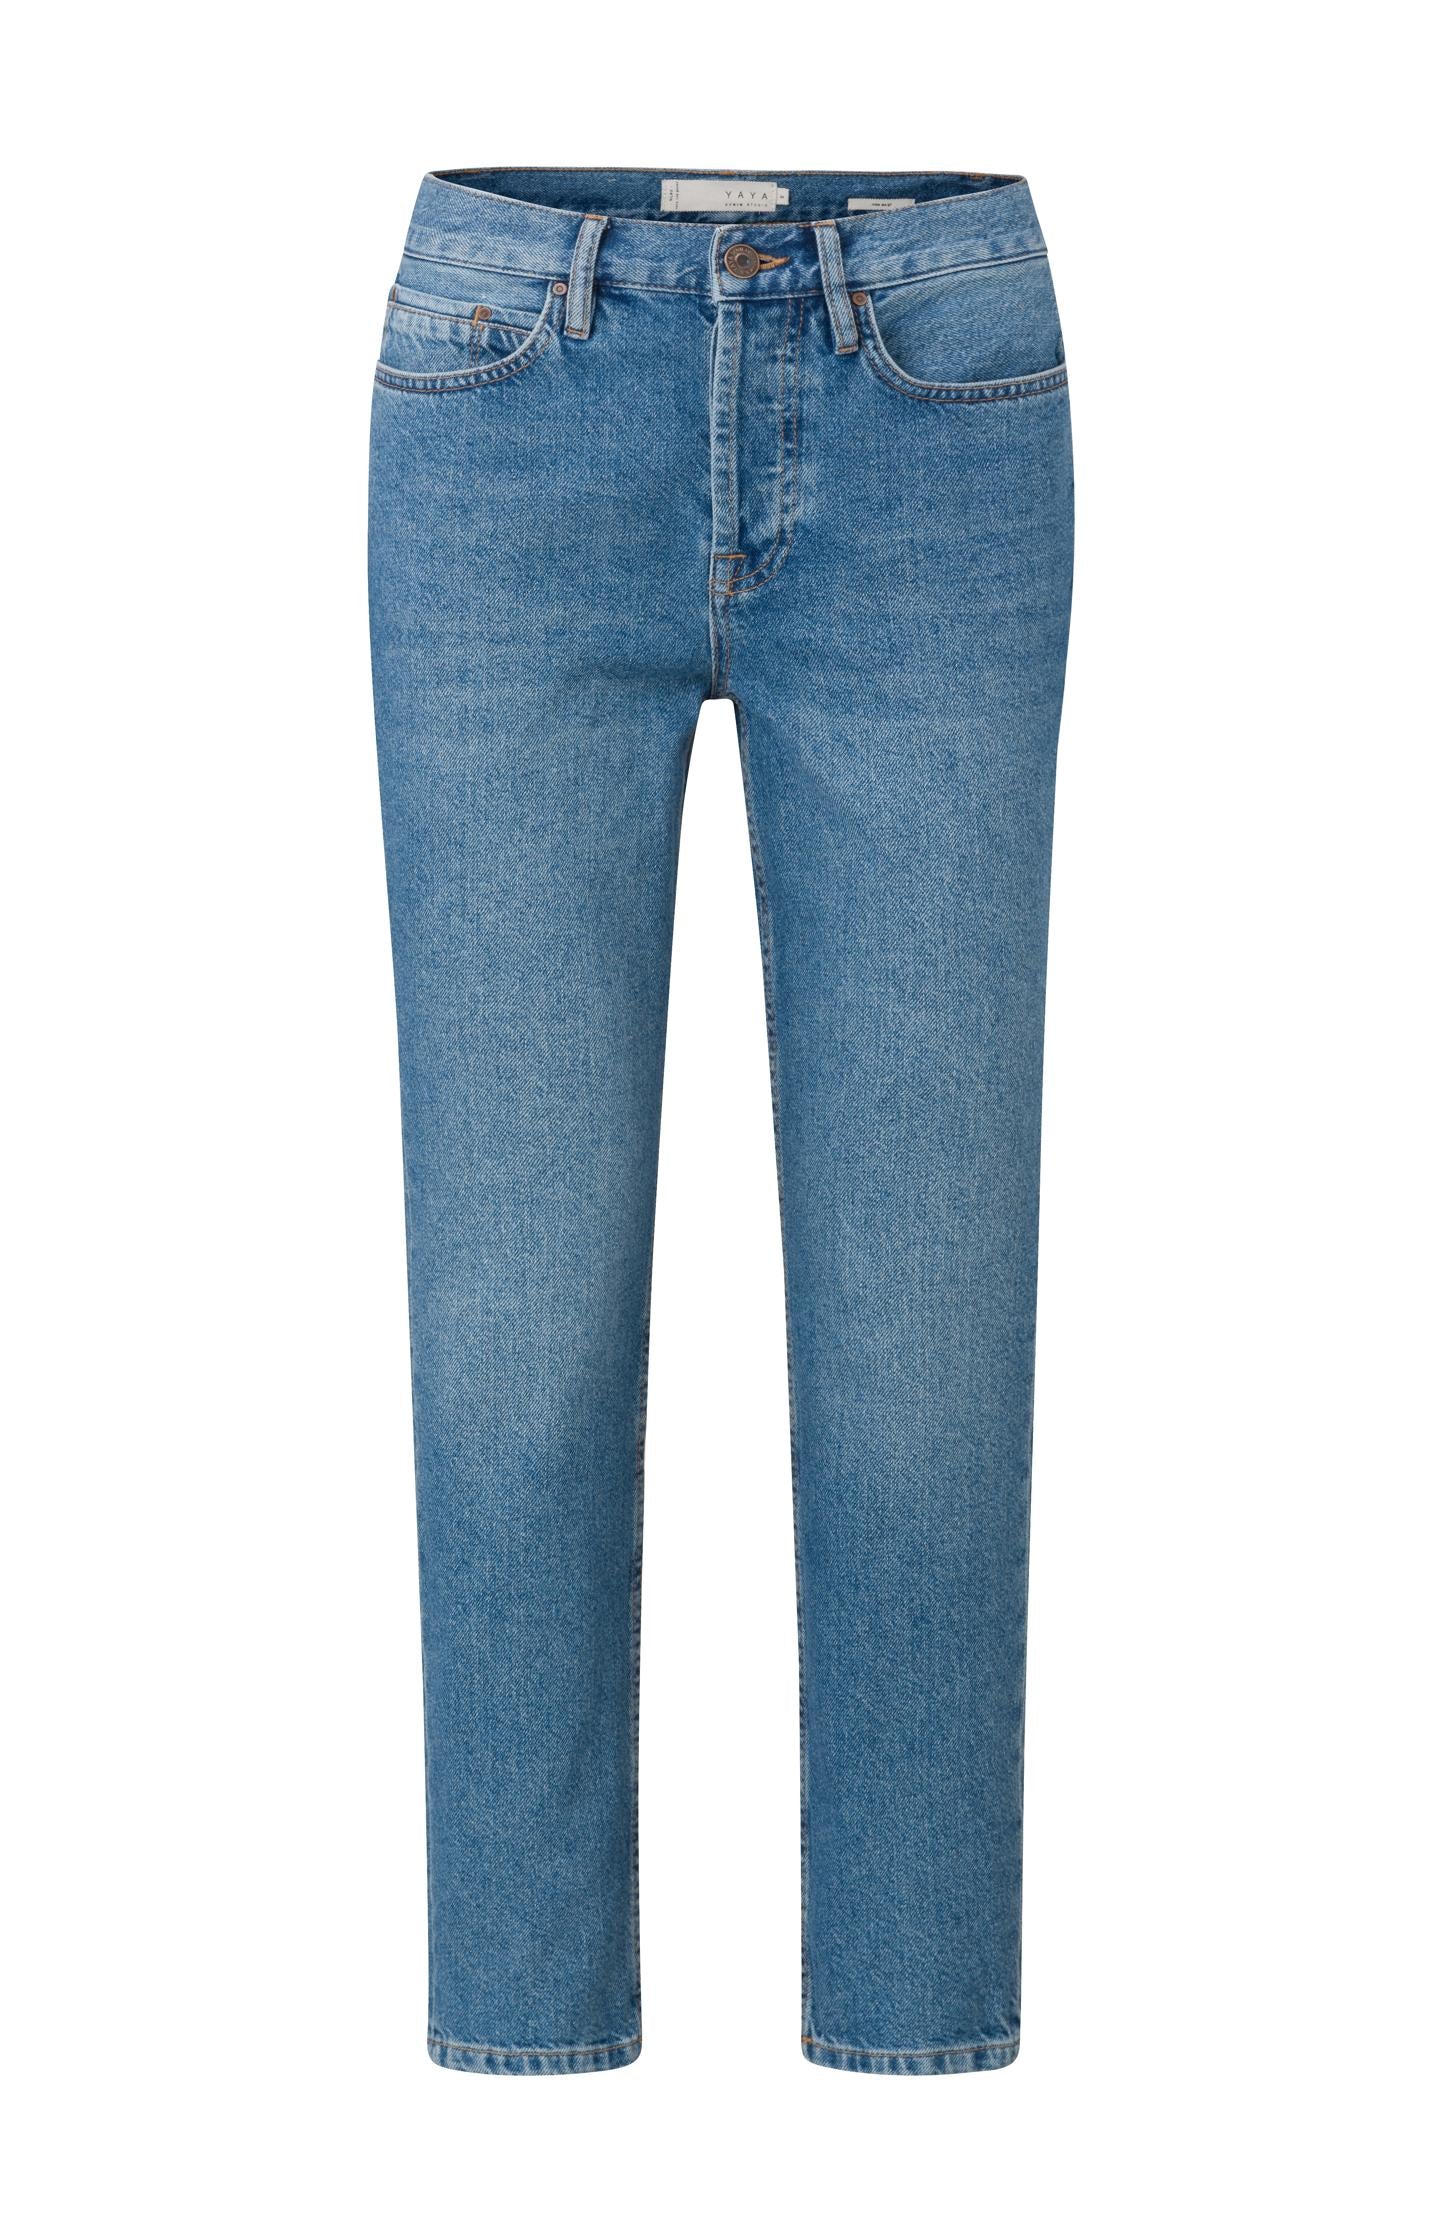 High waist denim trousers with straight leg and pockets - Type: product